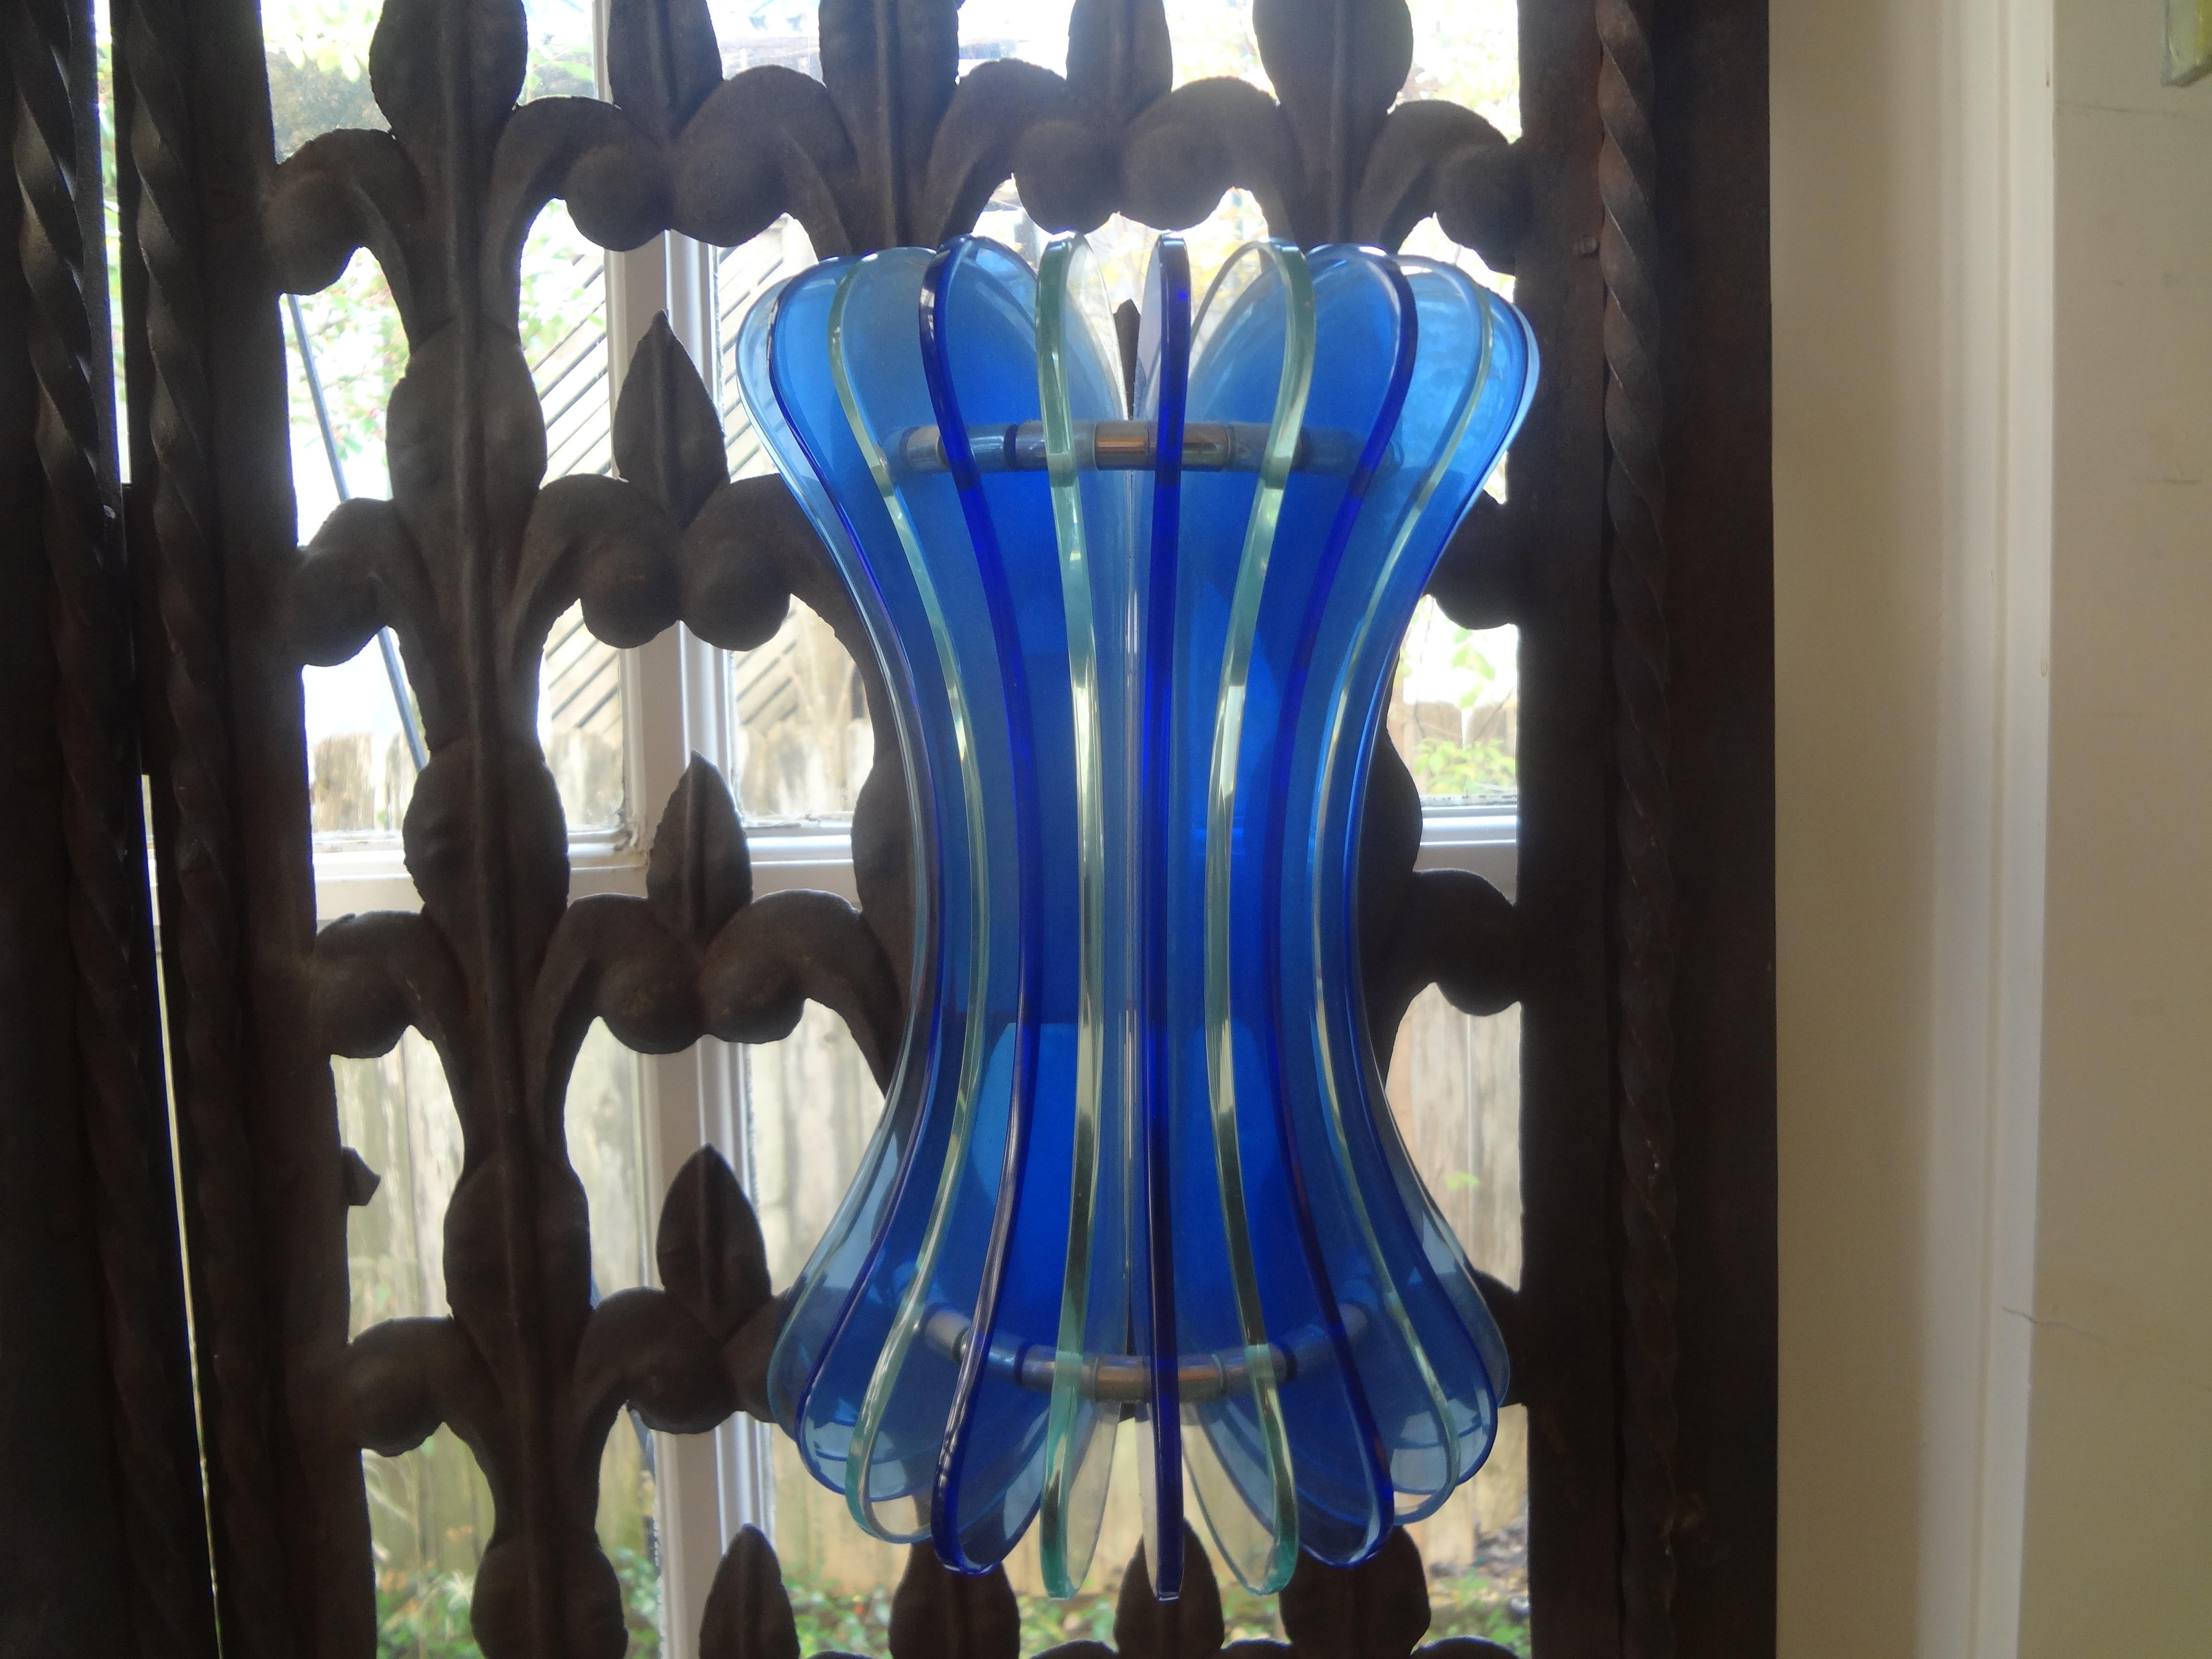 Pair of blue Murano glass sconces by Veca.
This stunning pair of Italian sconces have alternating blue and clear glass panels mounted on chromed steel frames.
Each sconce has been newly wired with two new sockets.